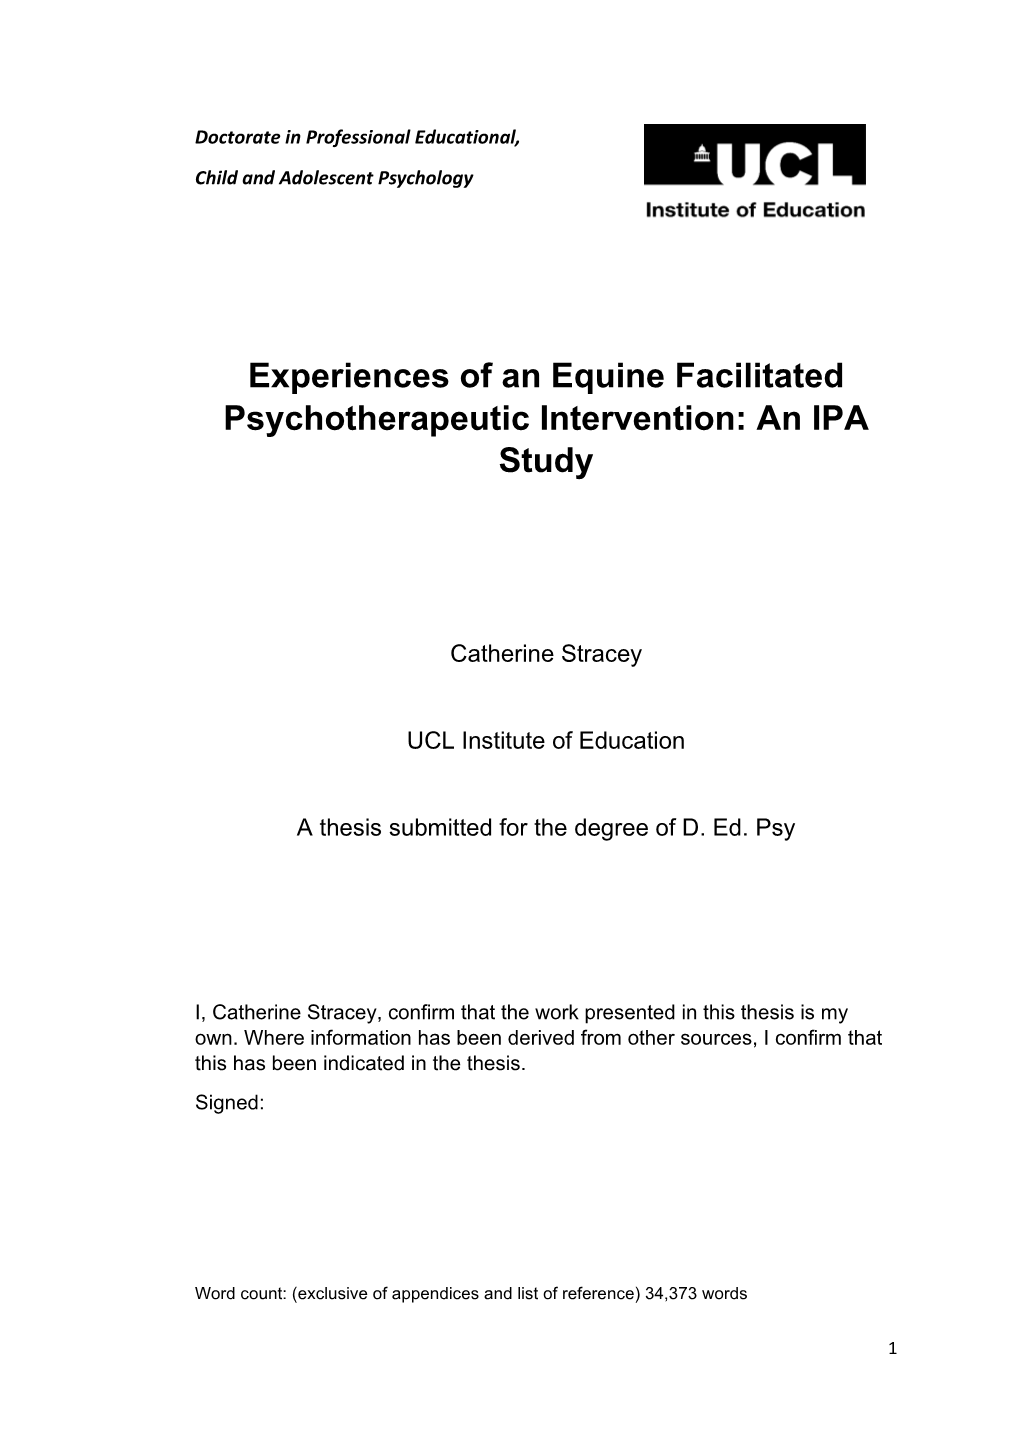 Experiences of an Equine Facilitated Psychotherapeutic Intervention: an IPA Study